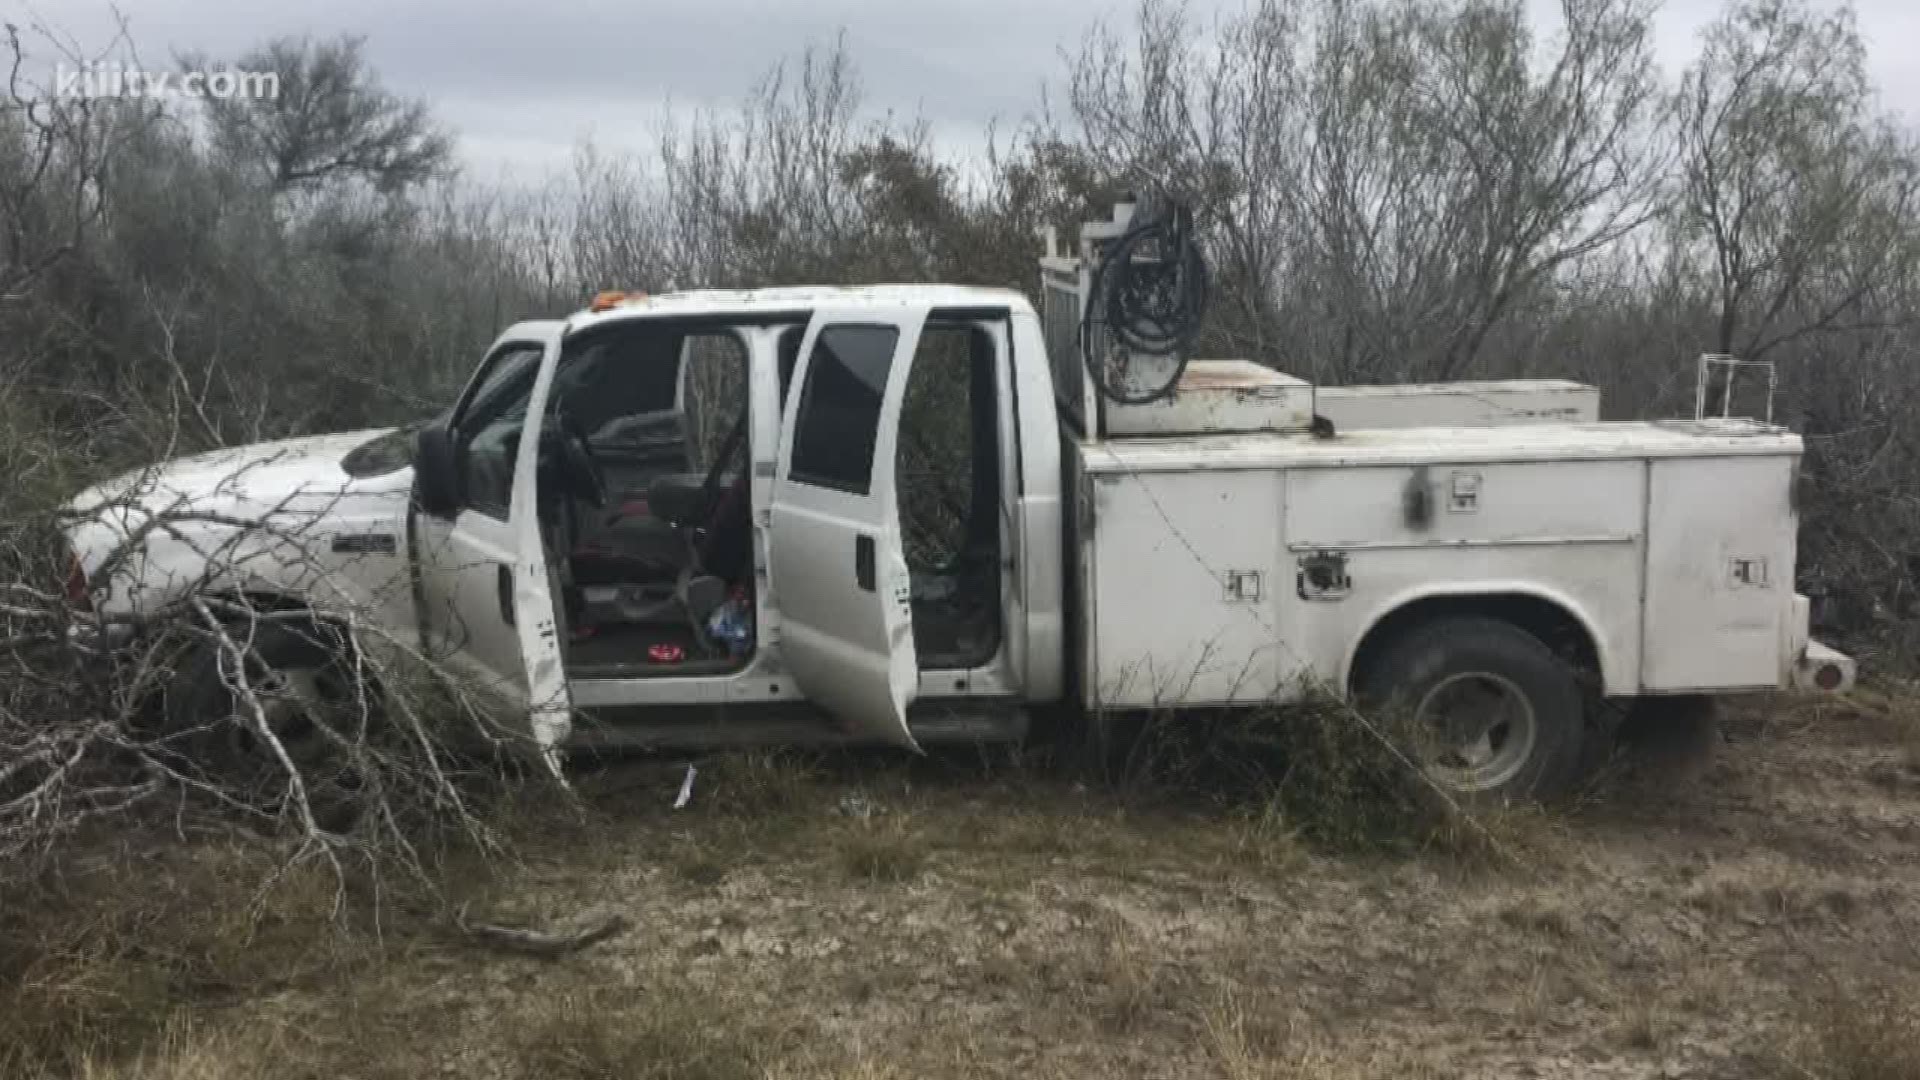 It happened Thanksgiving morning on State Highway 44 near Freer. The men tried to get away and drove through a fence at a ranch in rural Duval County.